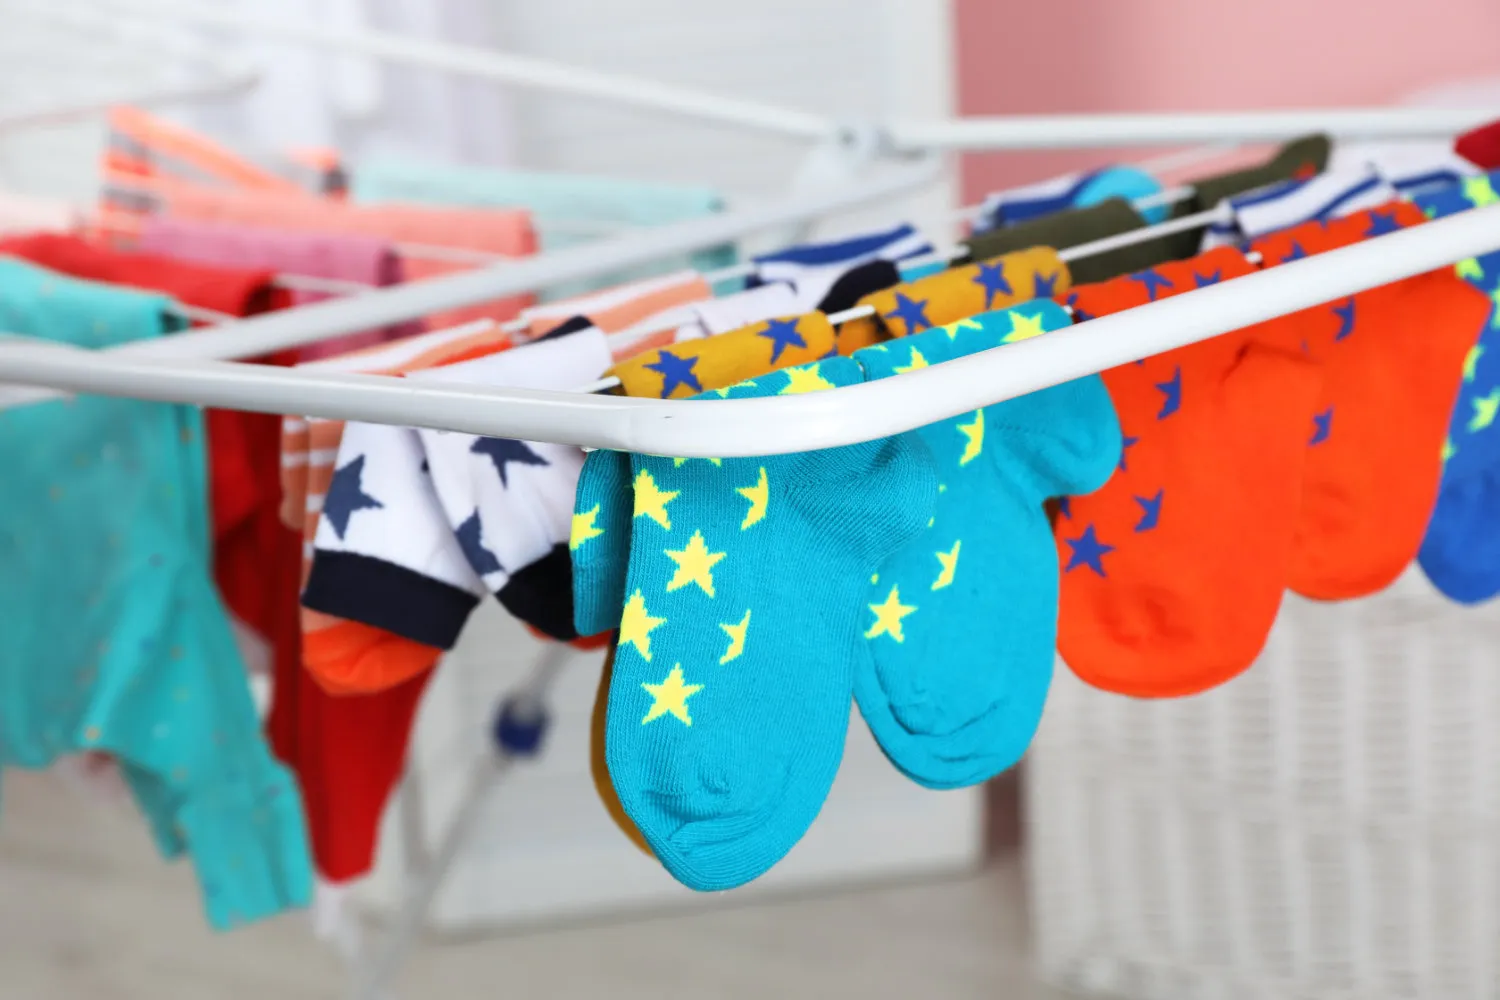 How To Dry Clothes Indoors (without causing damp)